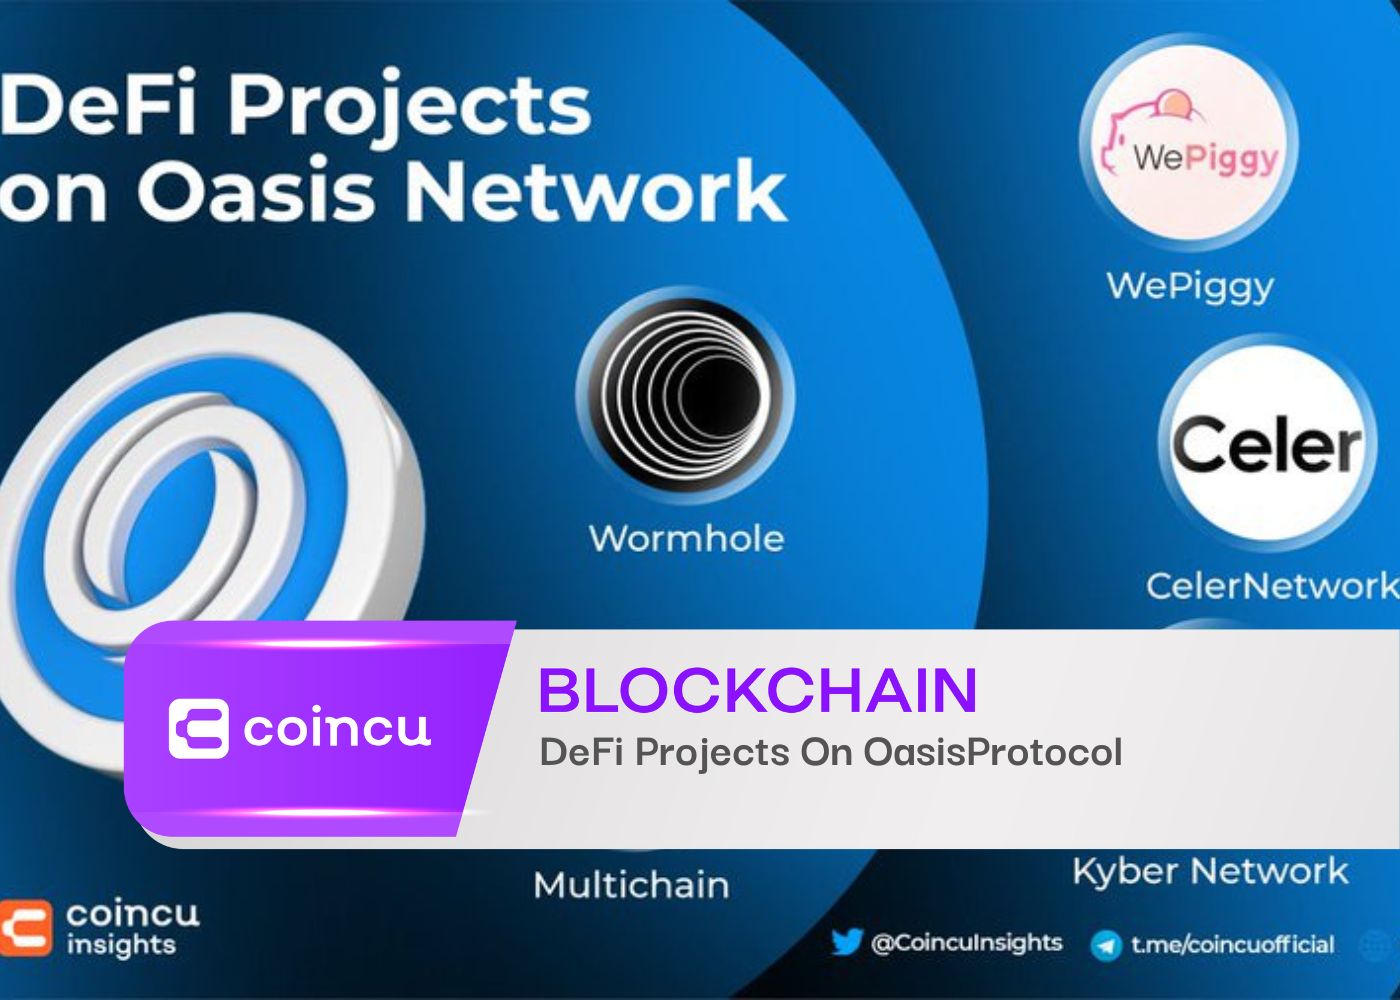 DeFi Projects On OasisProtocol